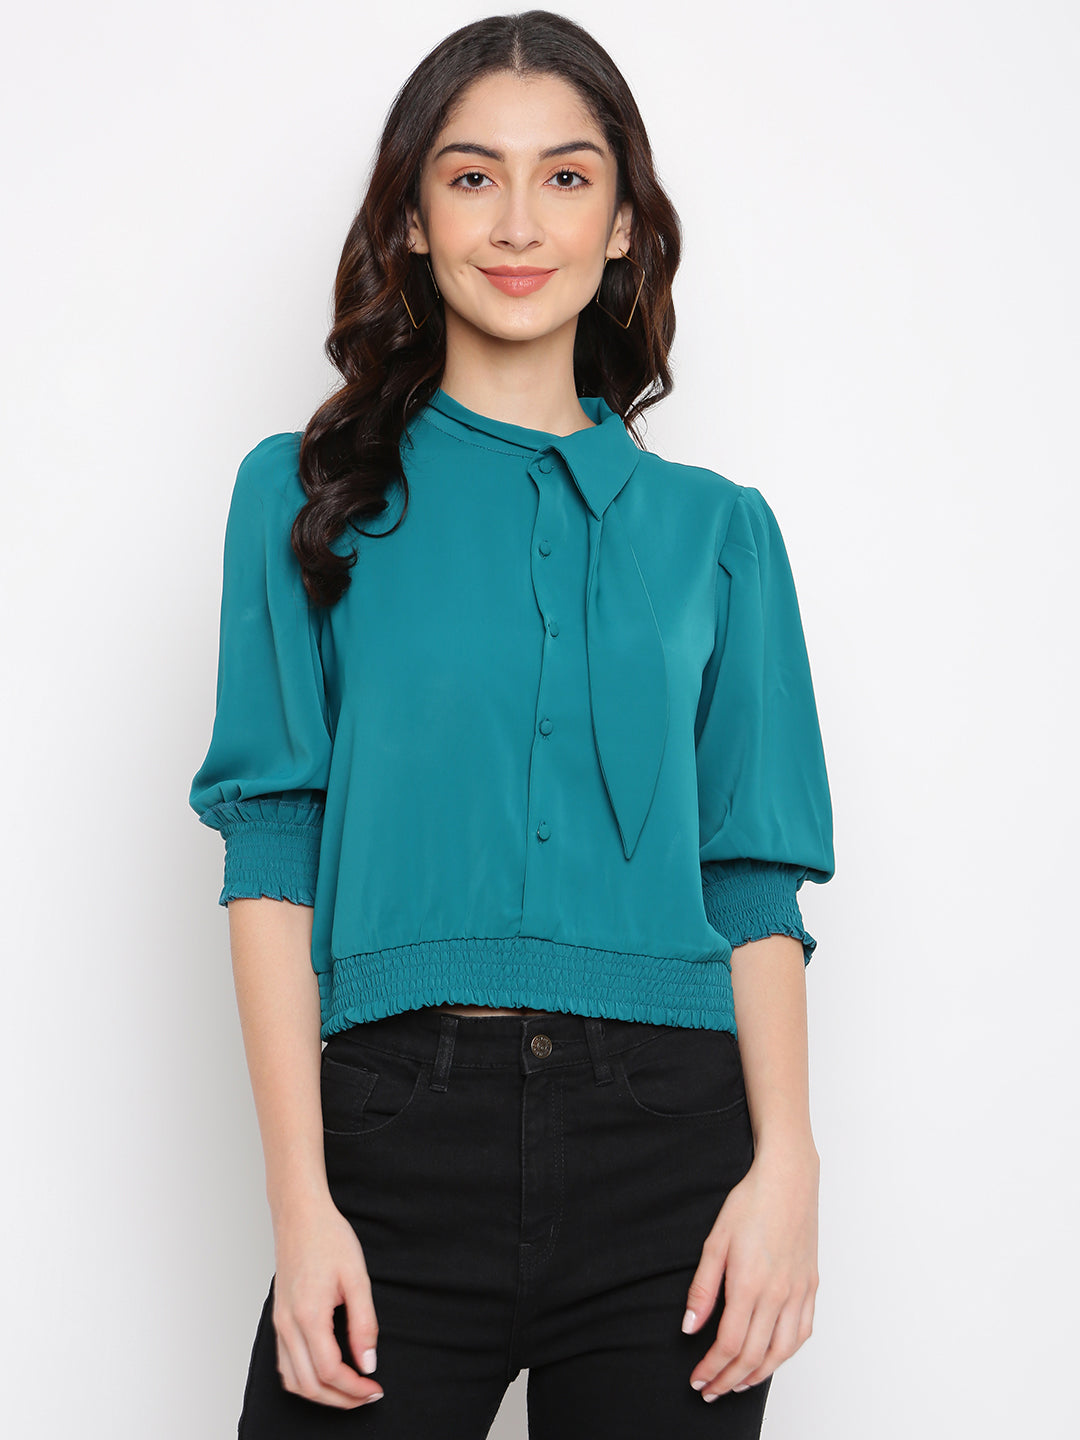 Teal 3/4 Sleeve Solid Blouse